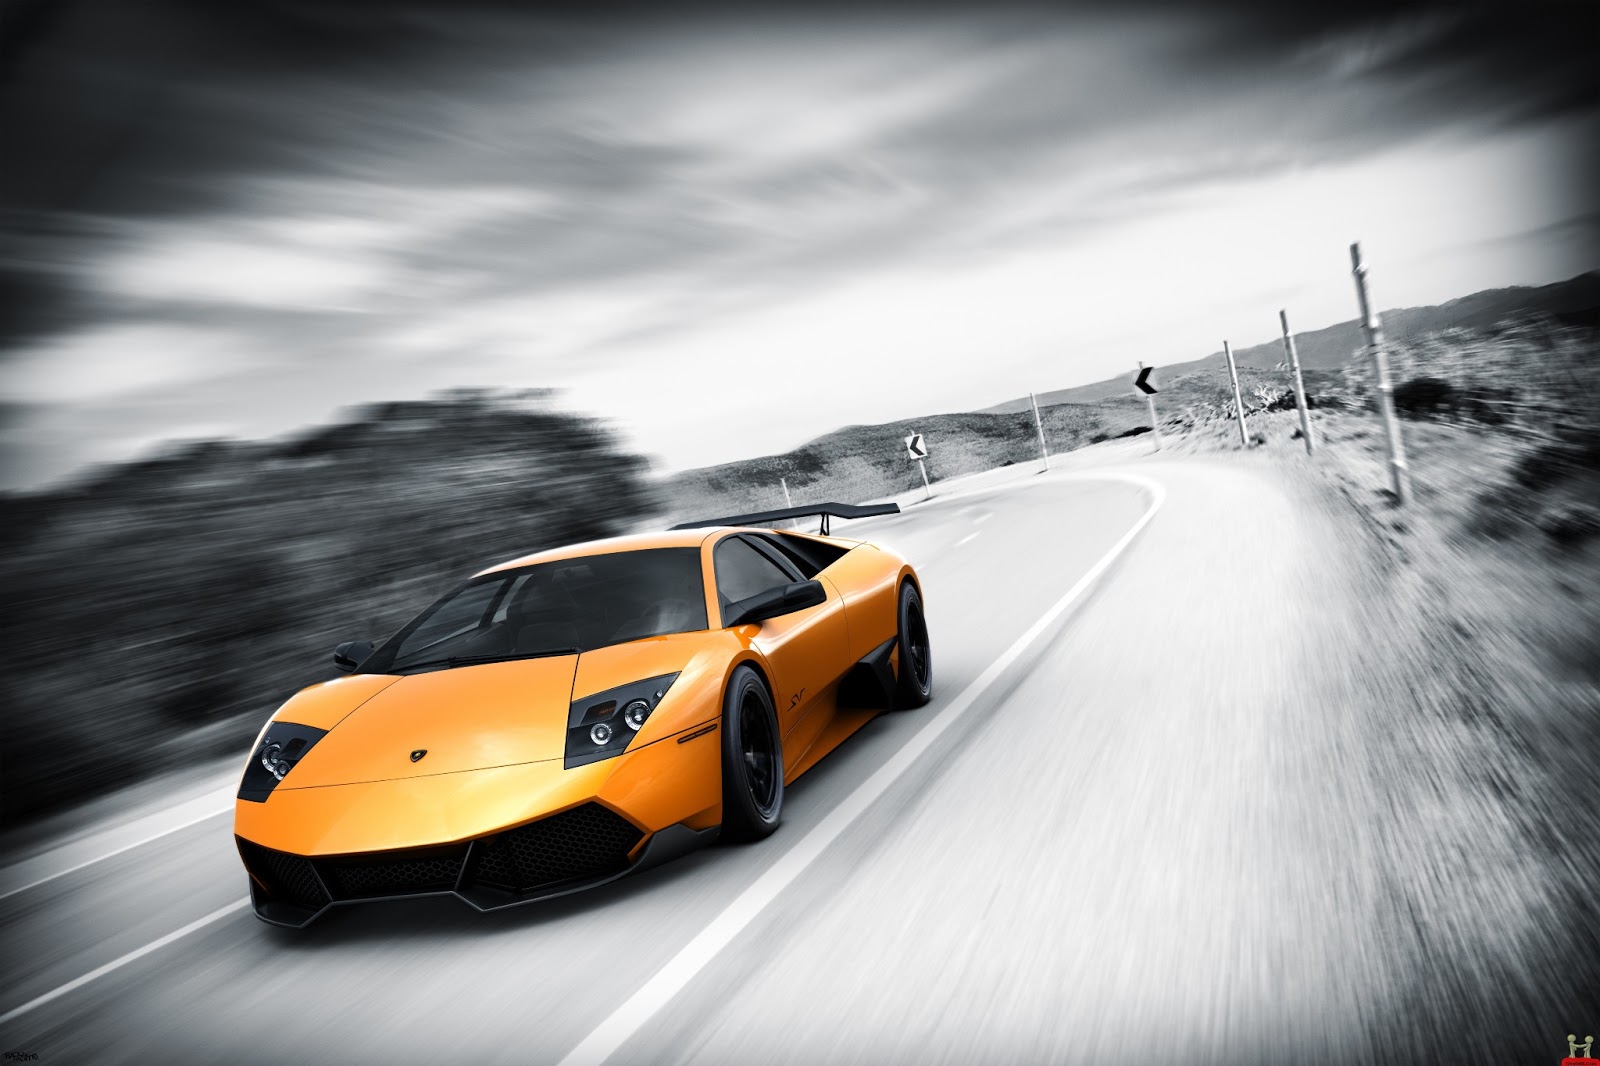 Cars-HD-Wallpapers: Lamborghini SuperVeloce best HD picture